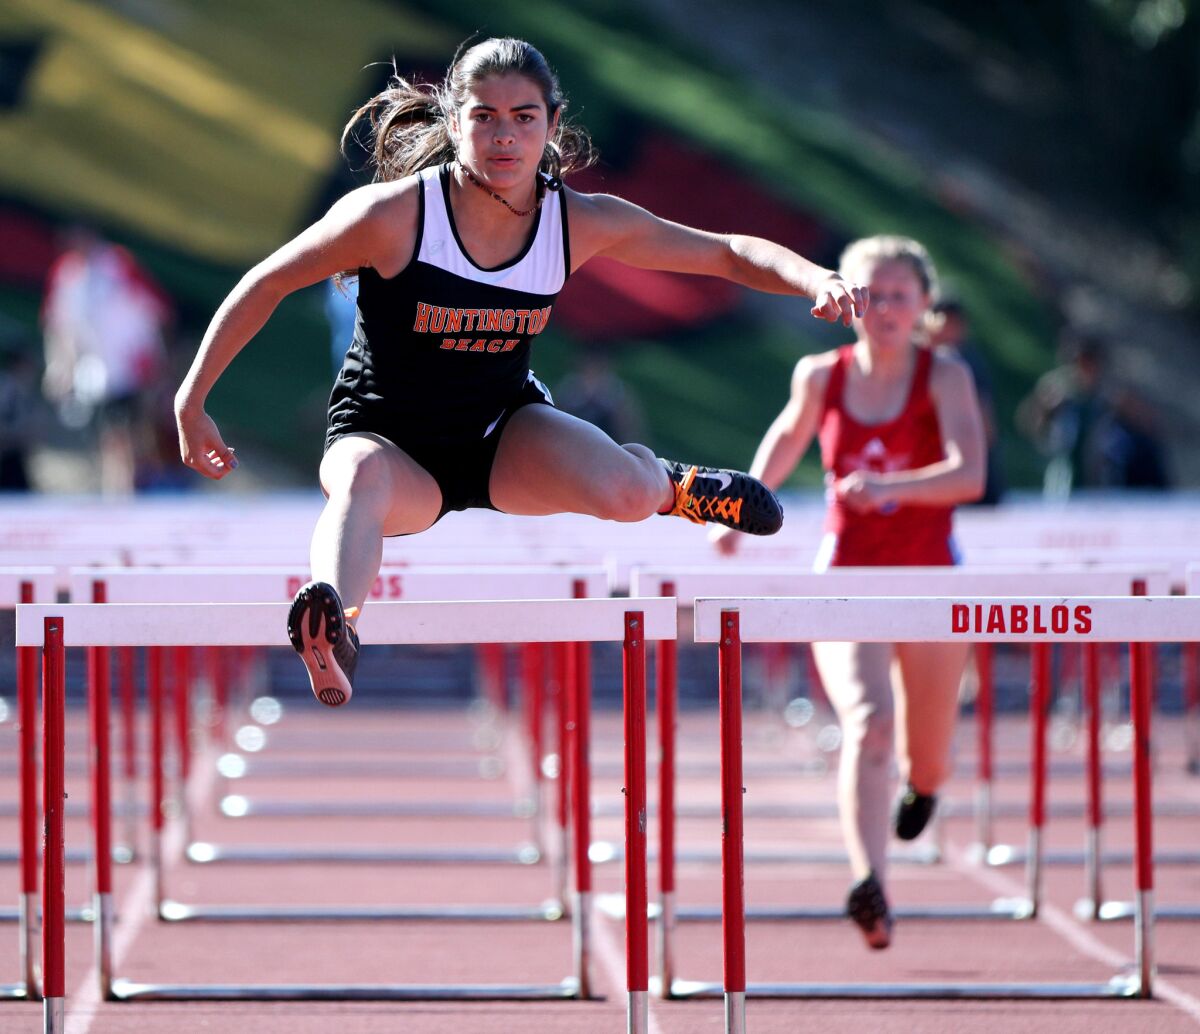 Huntington Beach's Kyli Moon-Rumsey competes in the 100-meter hurdles at the Orange County Championships at Mission Viejo High on April 13, 2019.